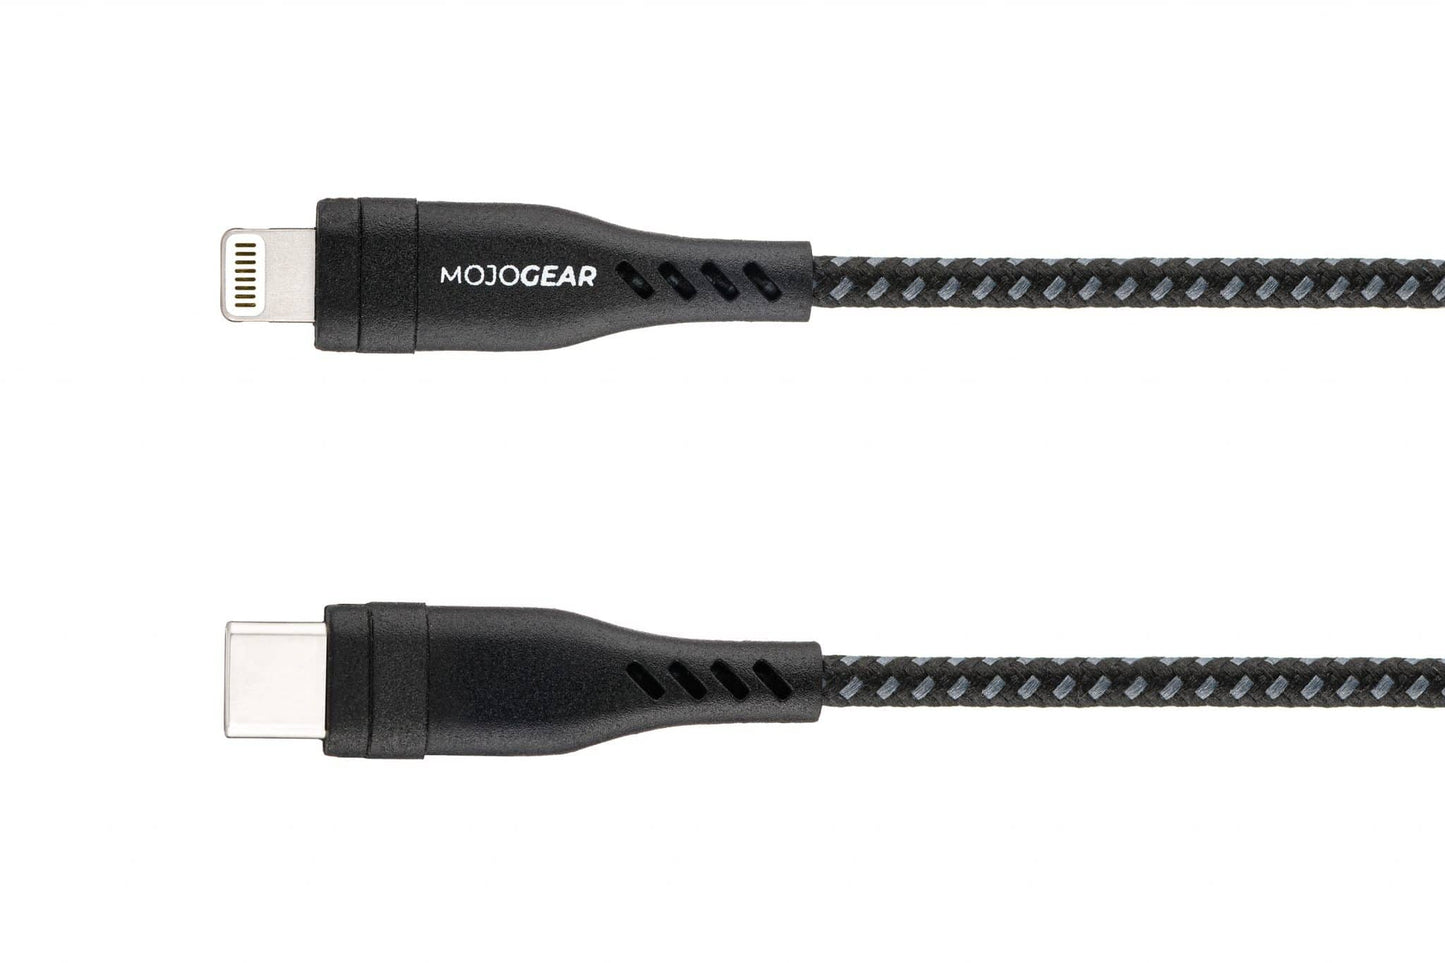 2x MOJOGEAR Apple Lightning to USB-C cable extra strong [DUO PACK]